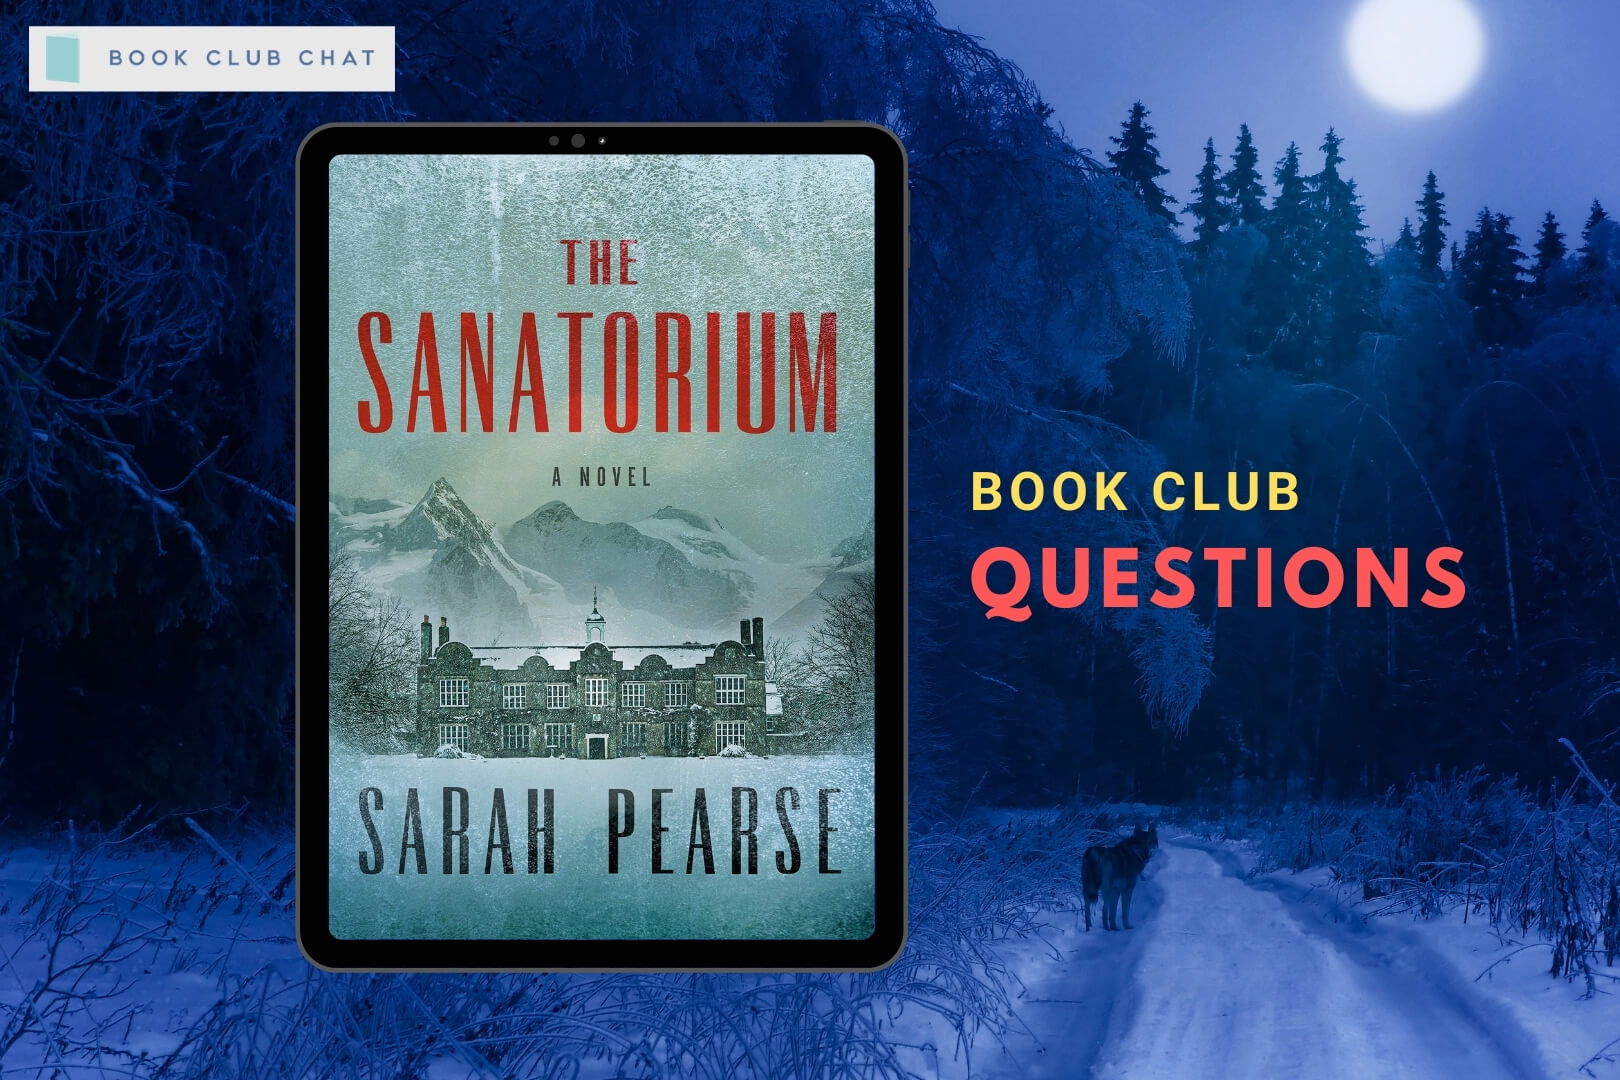 Book Club Questions for The Sanatorium by Sarah Pearse